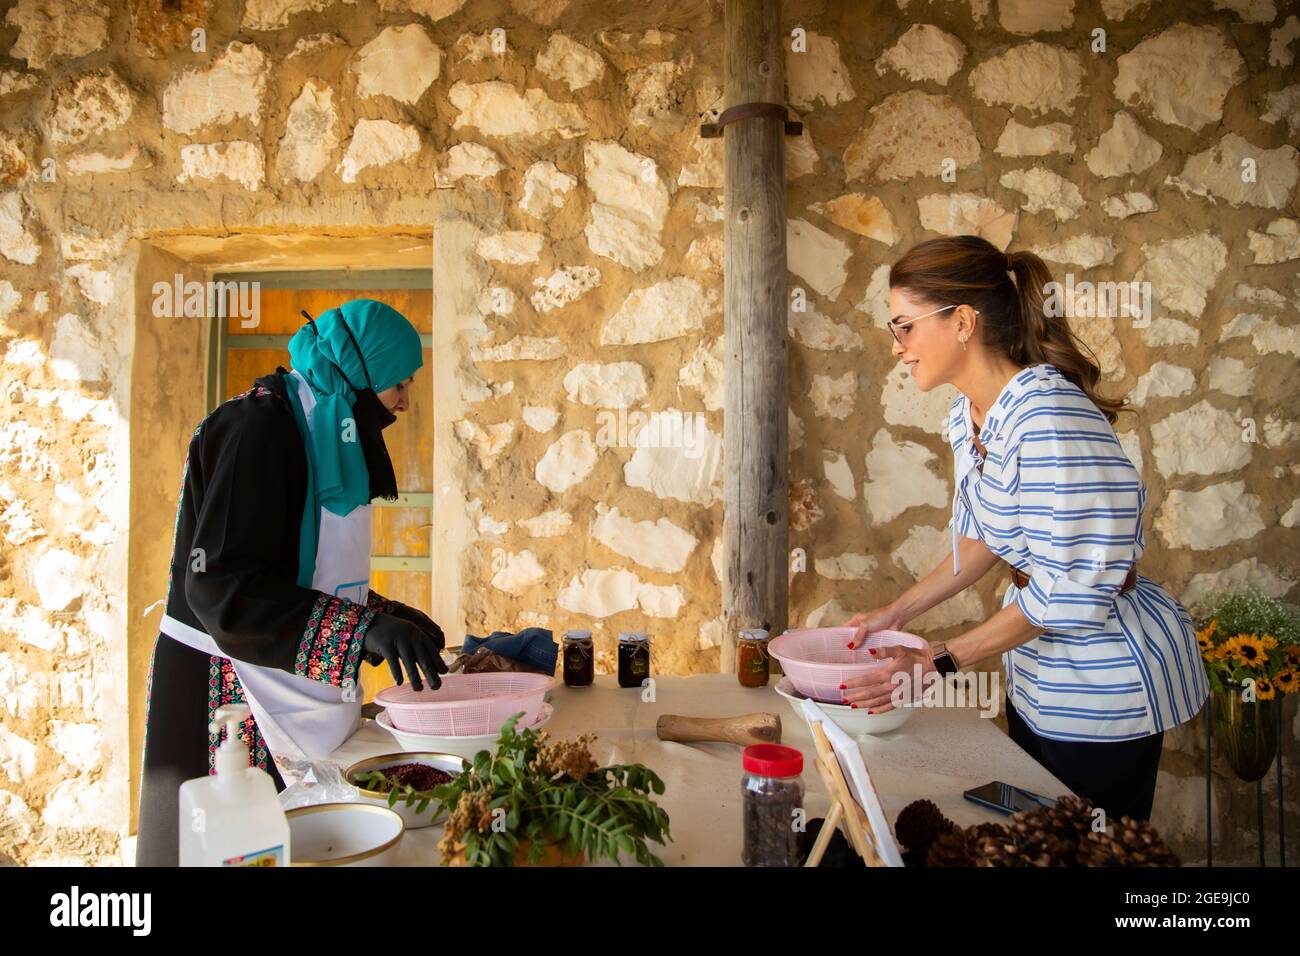 Ajloun, Jordanien. 21st July, 2020. Queen Rania of Jordan in Aljoun, on July 21, 2020, during a visit to the Ajloun Forest Reserve and Reef Springs Resort Credit: Royal Hashemite Court/Albert Nieboer/Netherlands OUT/Point de Vue OUT/dpa/Alamy Live News Stock Photo